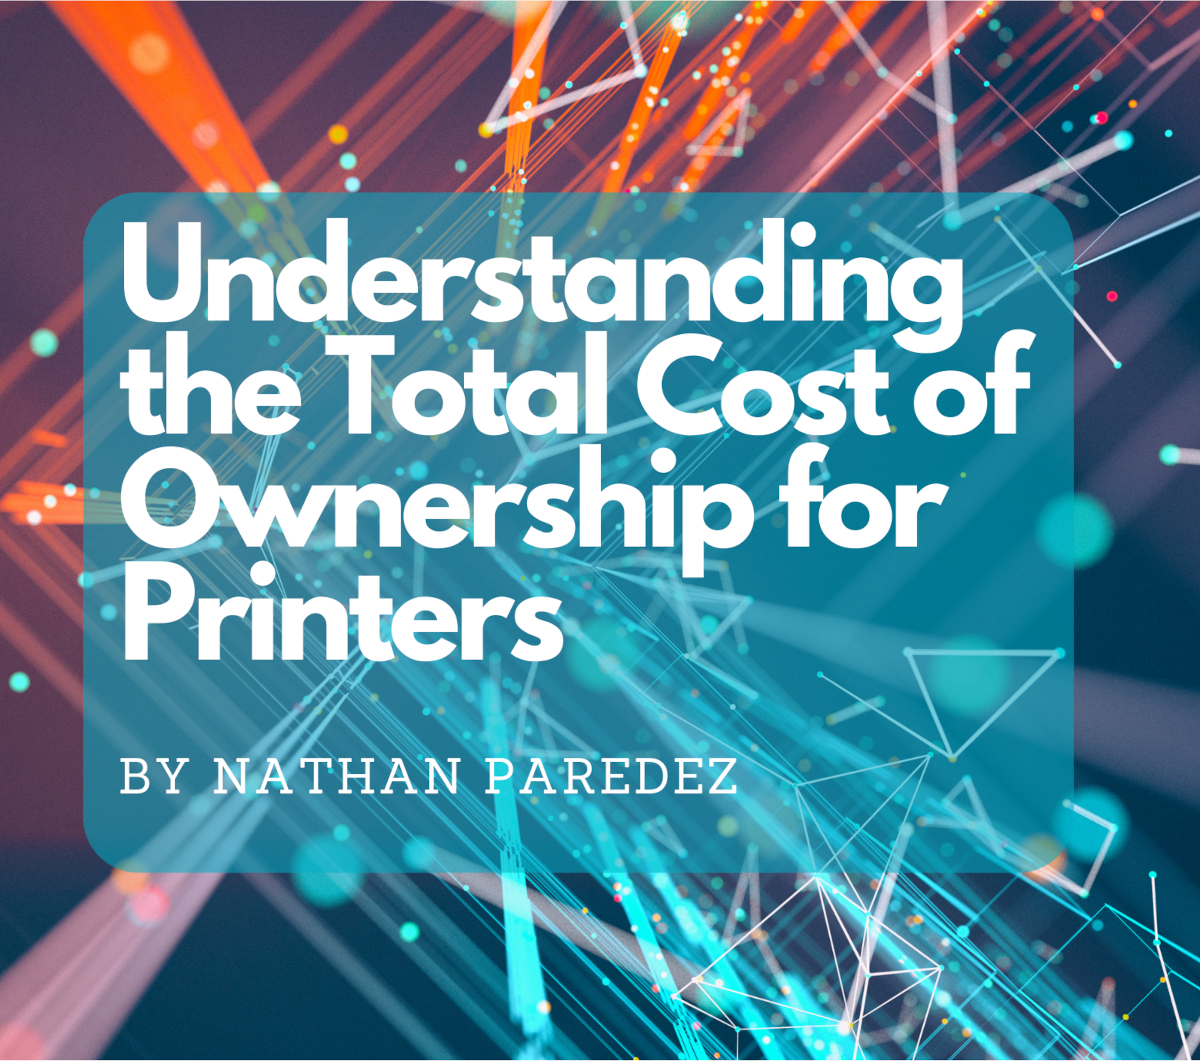 Understanding the Total Cost of Ownership